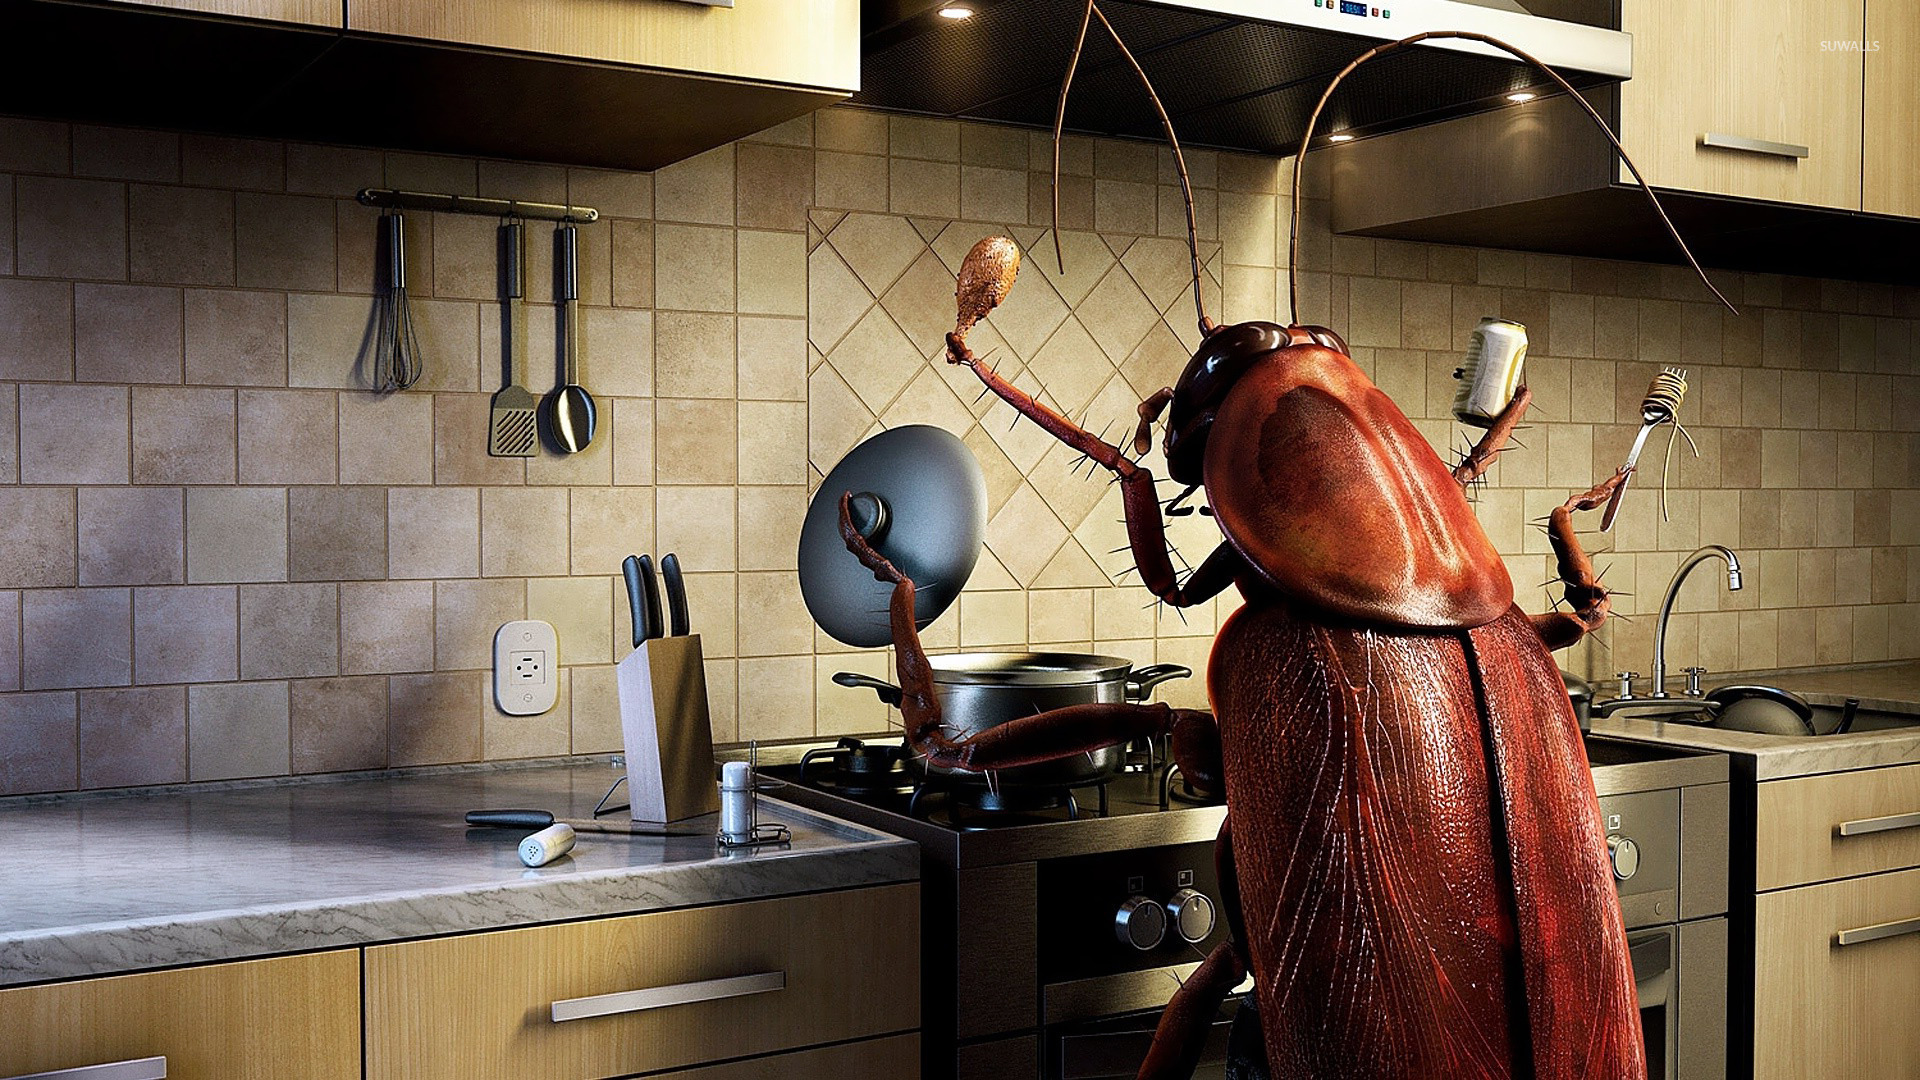 Insect cooking wallpaper - Funny wallpapers - #21231